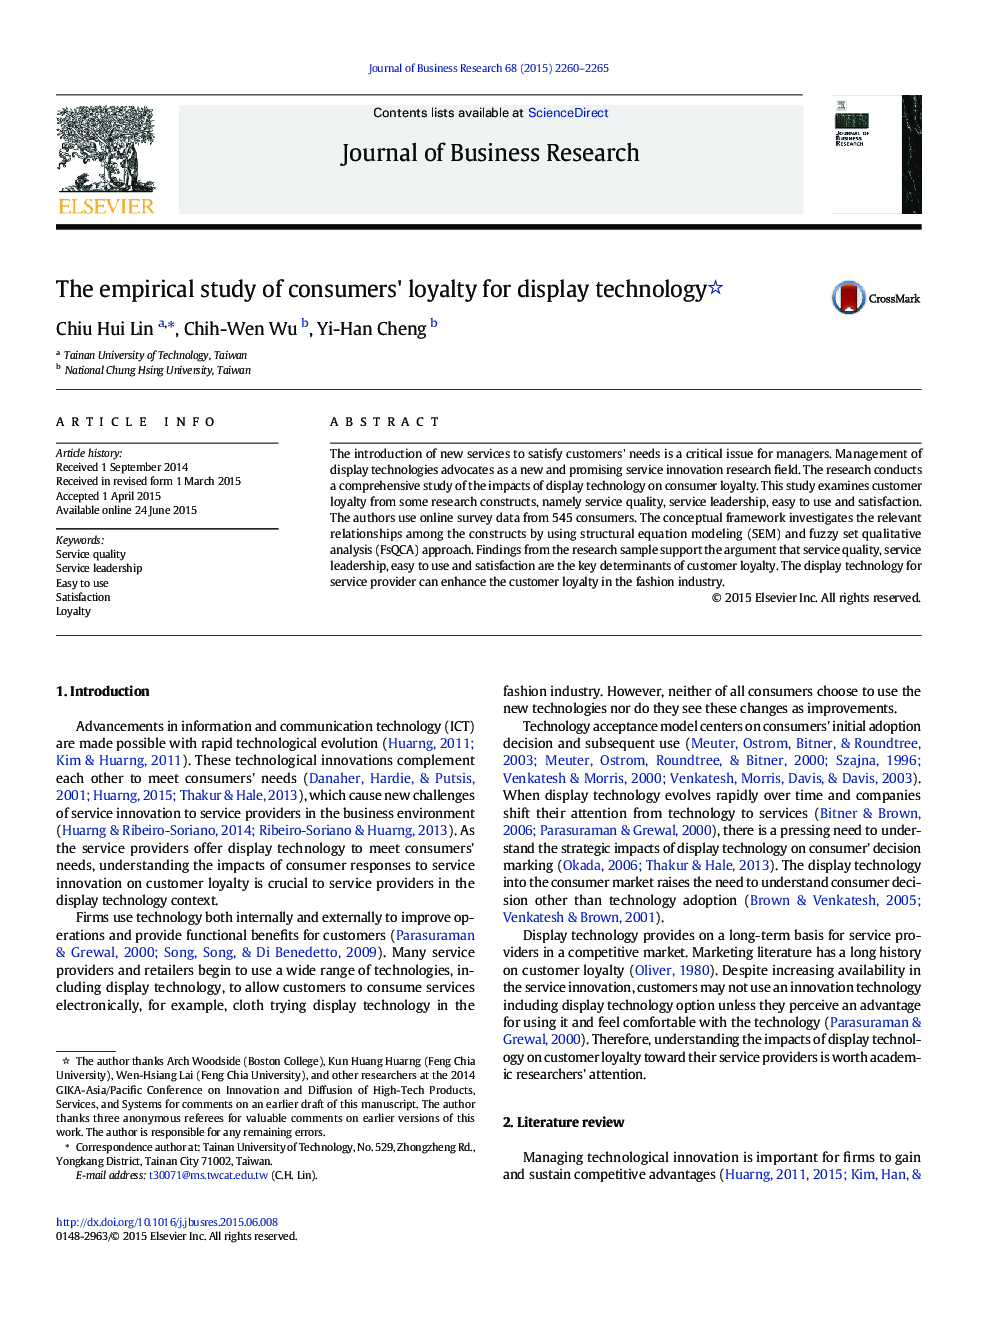 The empirical study of consumers' loyalty for display technology